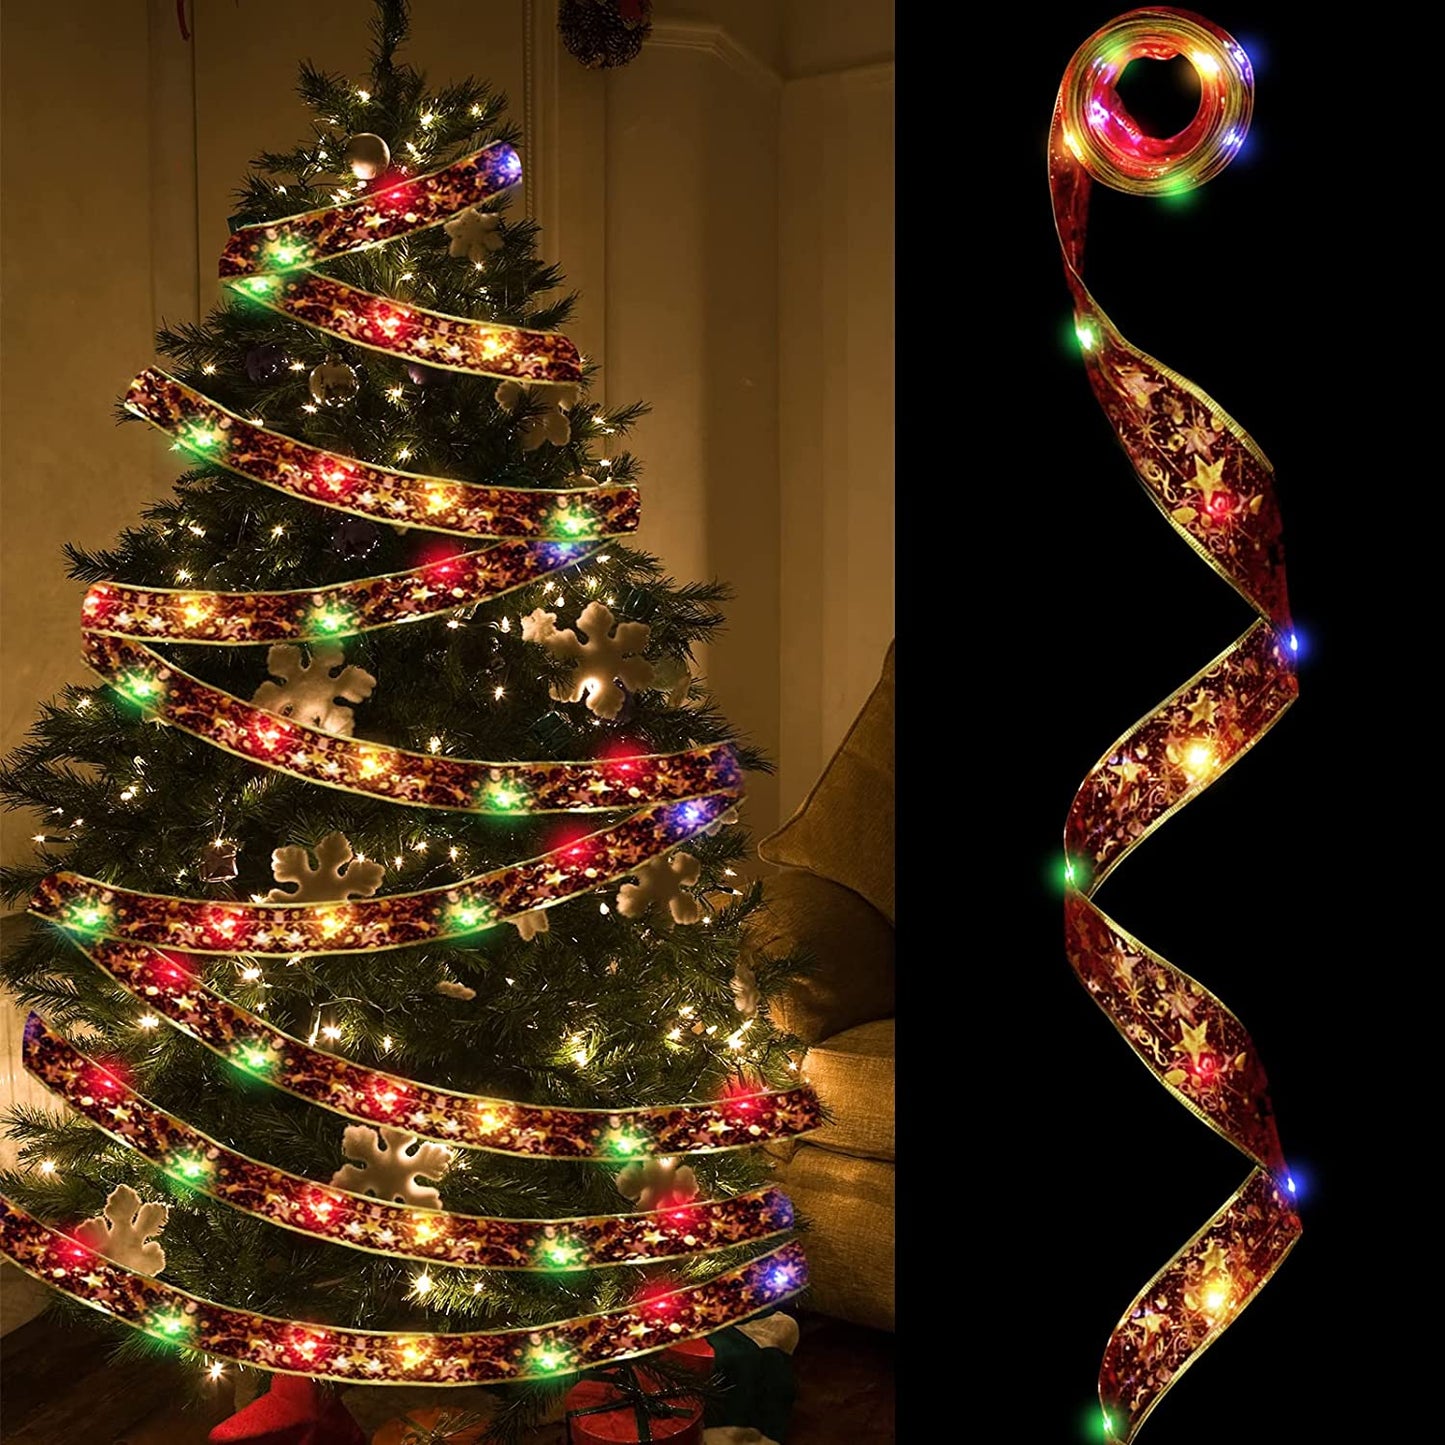 Christmas Tree Ribbon Decorations LED Colorful Lights Christmas Tree Decorations Ribbon Fairy Lights Room Bedroom Indoor Decor